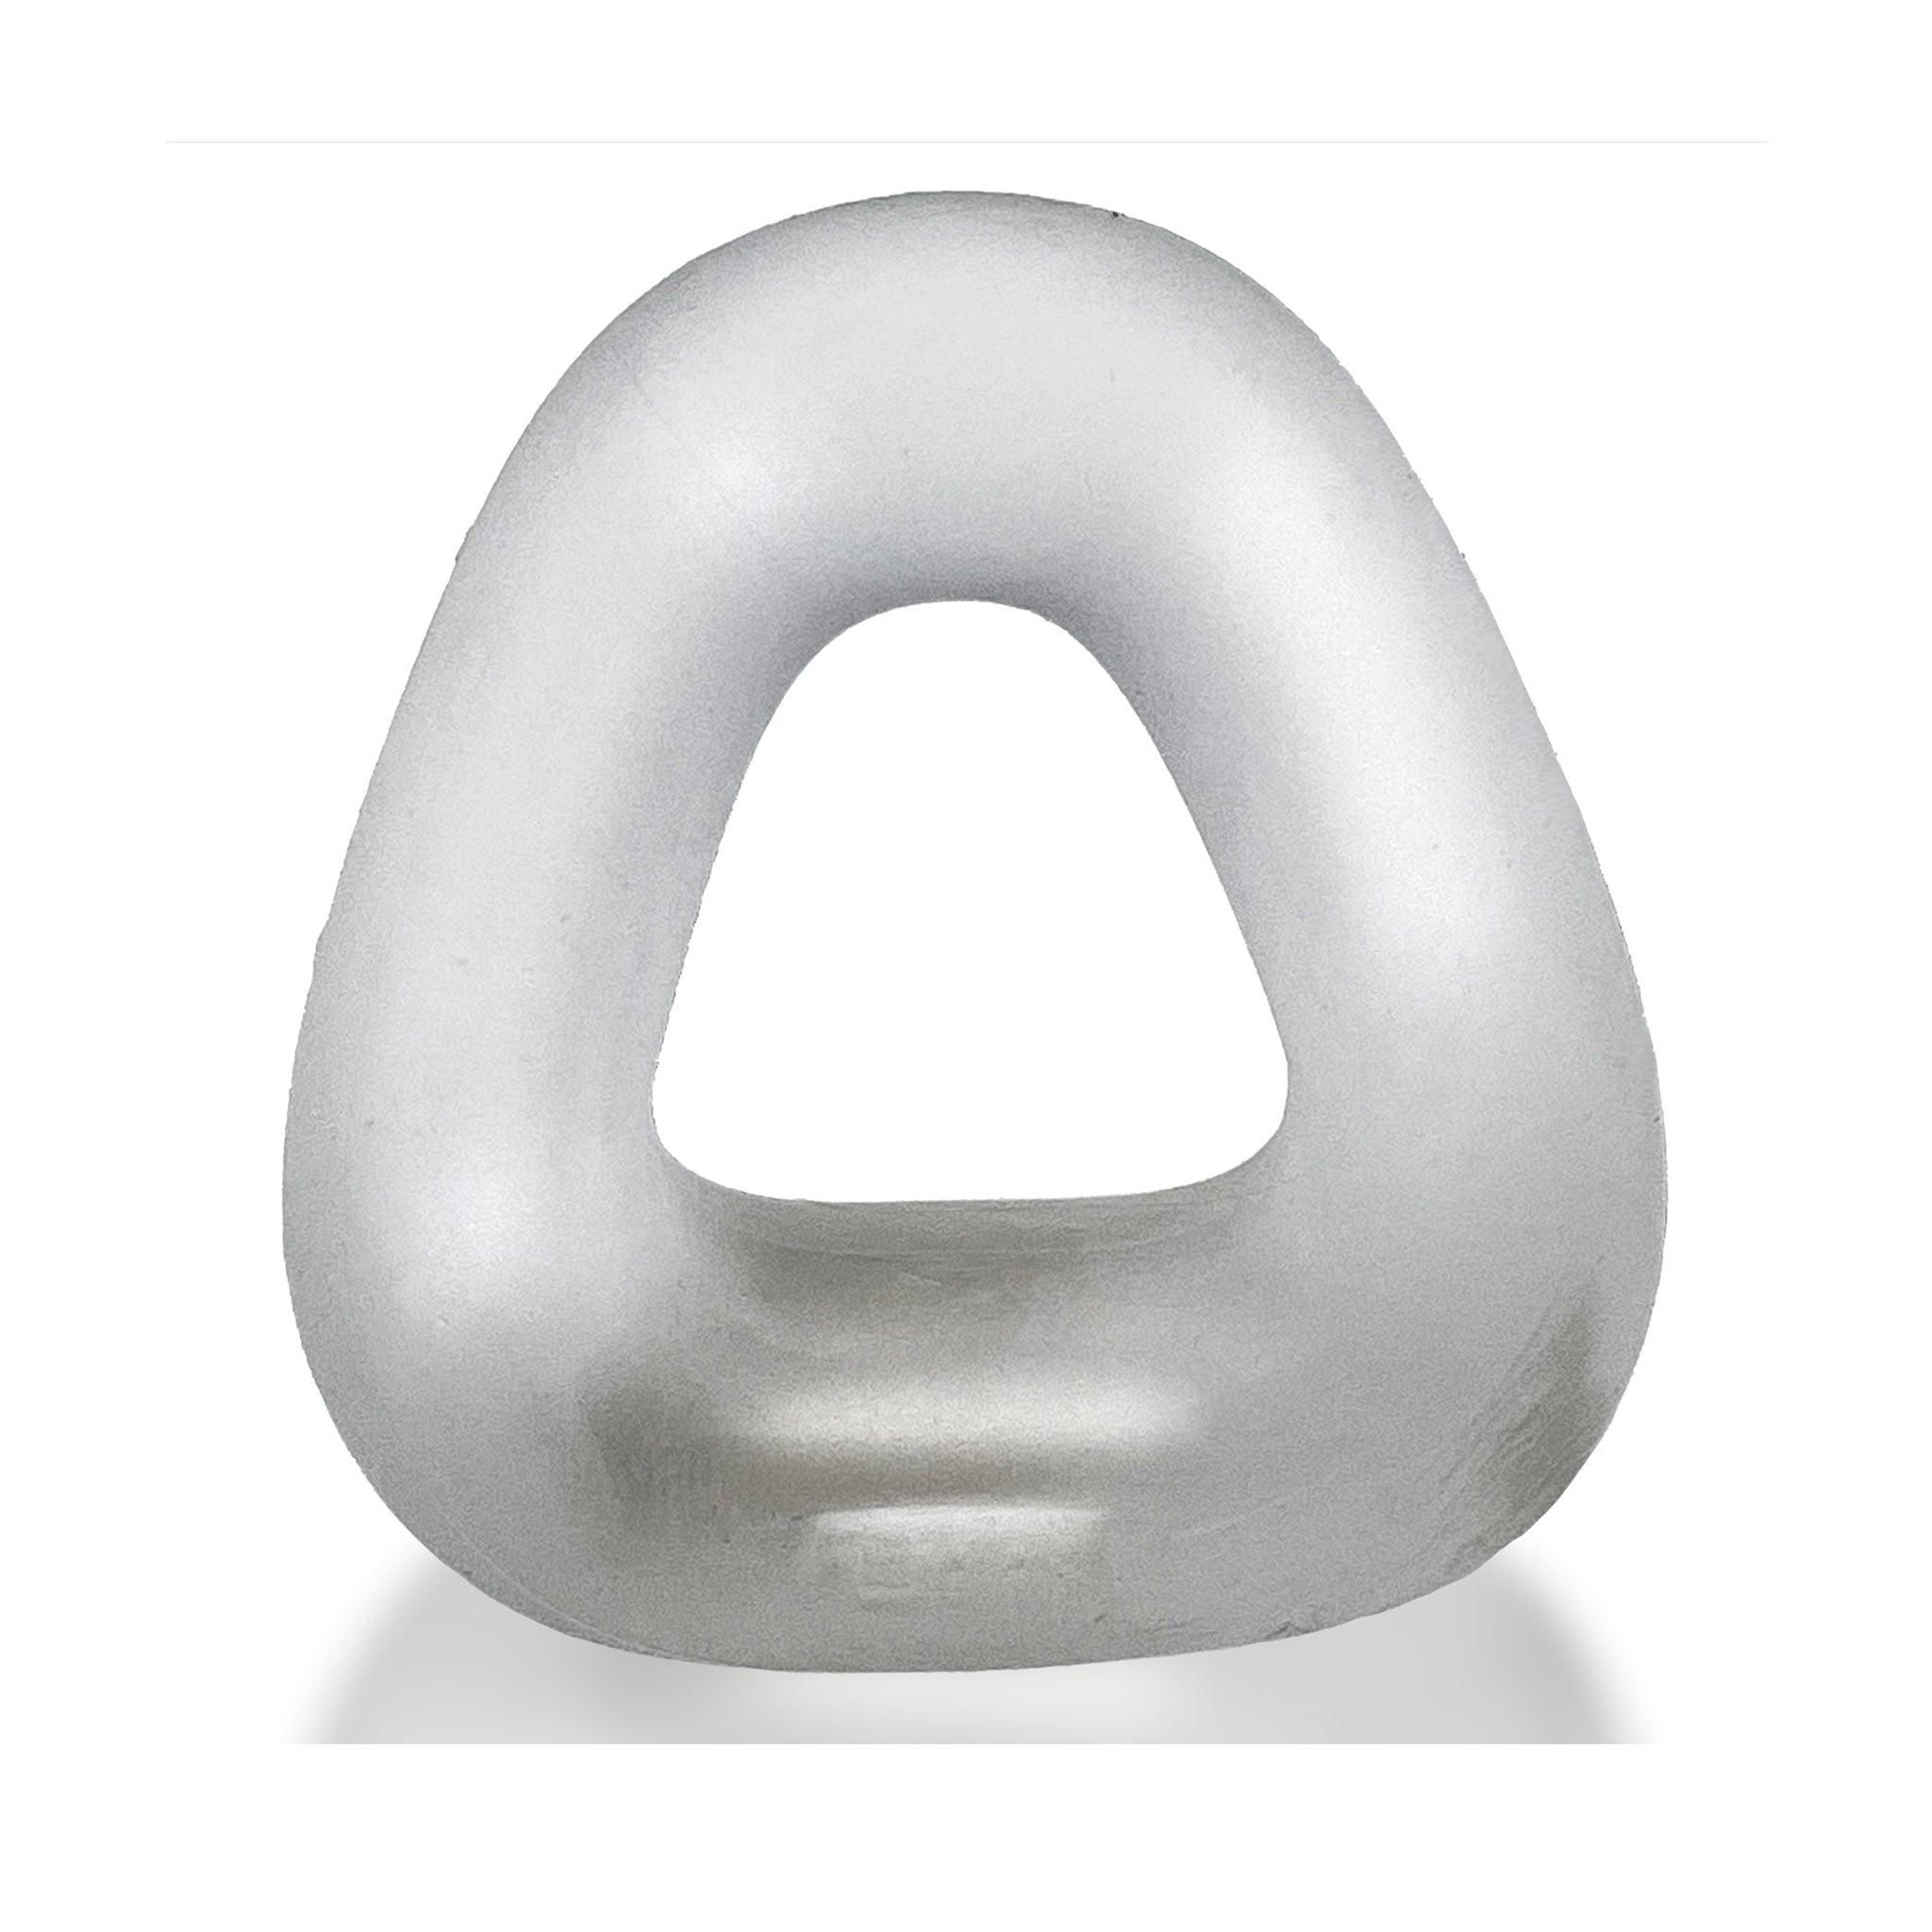 hünky junk ZOID Lifter Bulge Cockring - Clear - CheapLubes.com